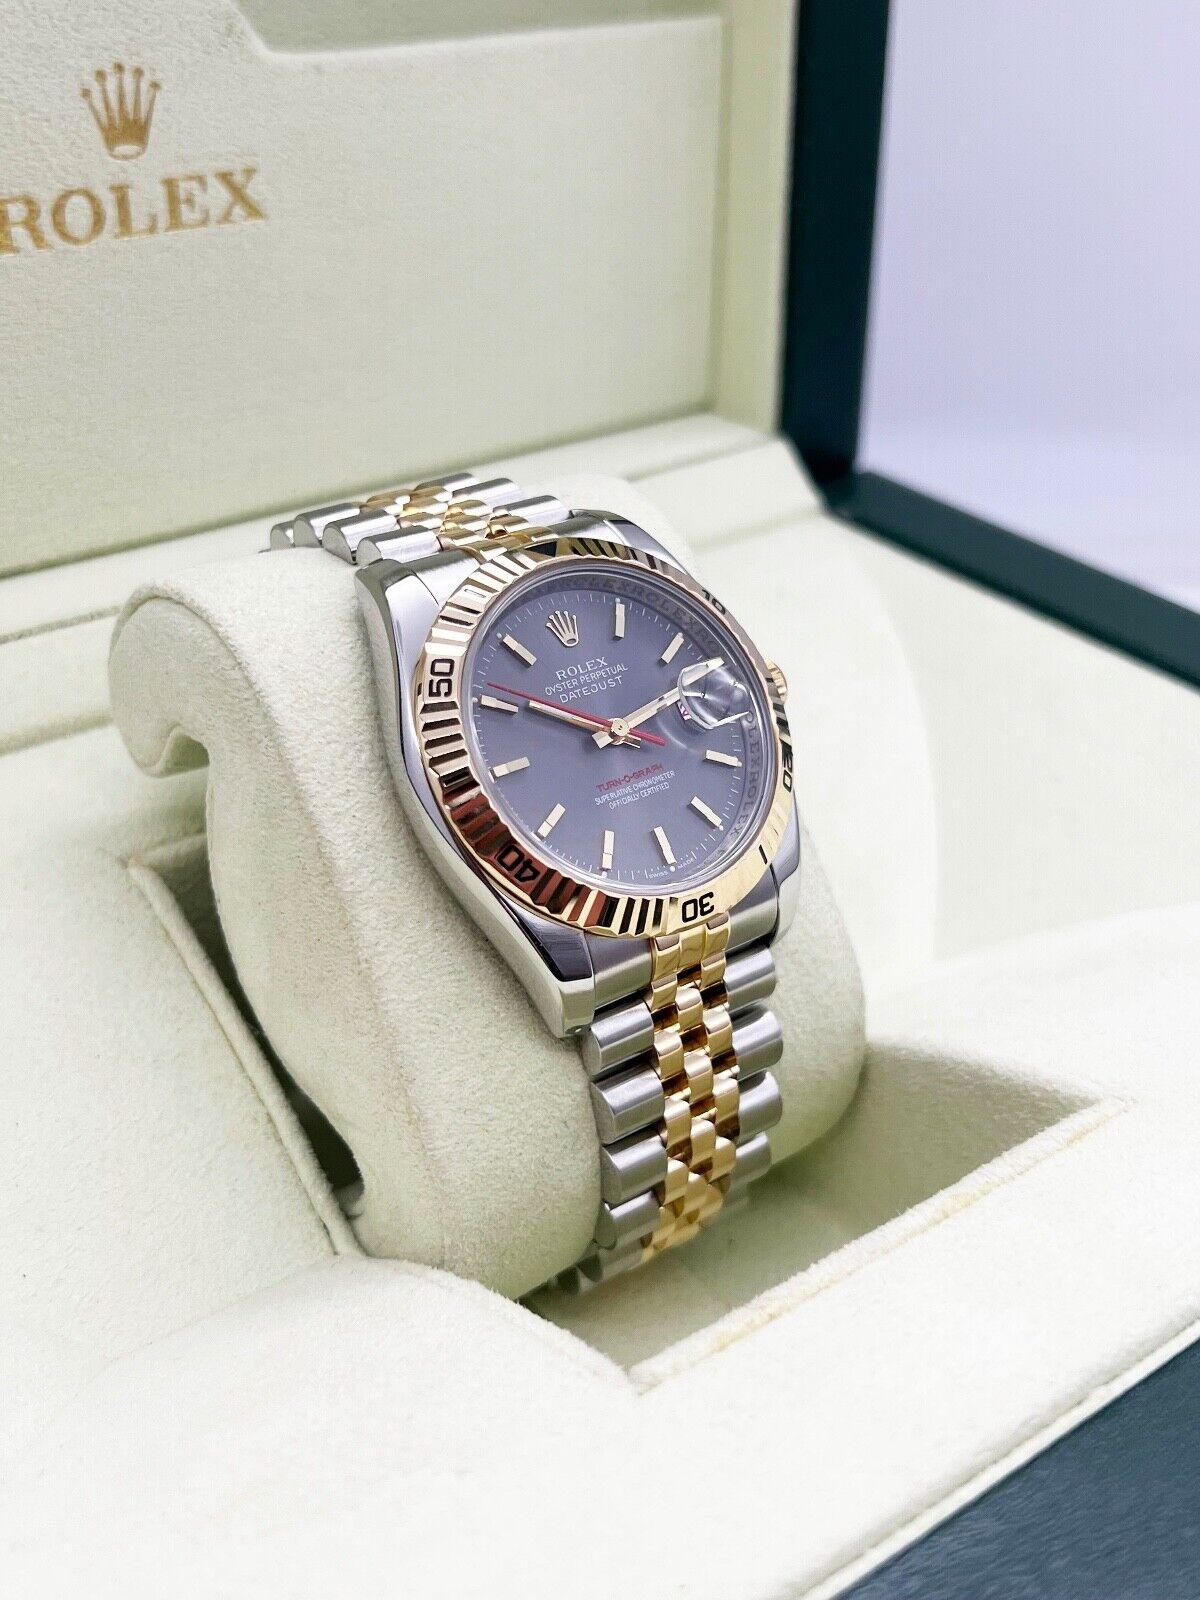 Rolex 116263 Datejust Turn o Graph Silver Dial 18K Yellow Gold Steel Box Paper In Excellent Condition For Sale In San Diego, CA